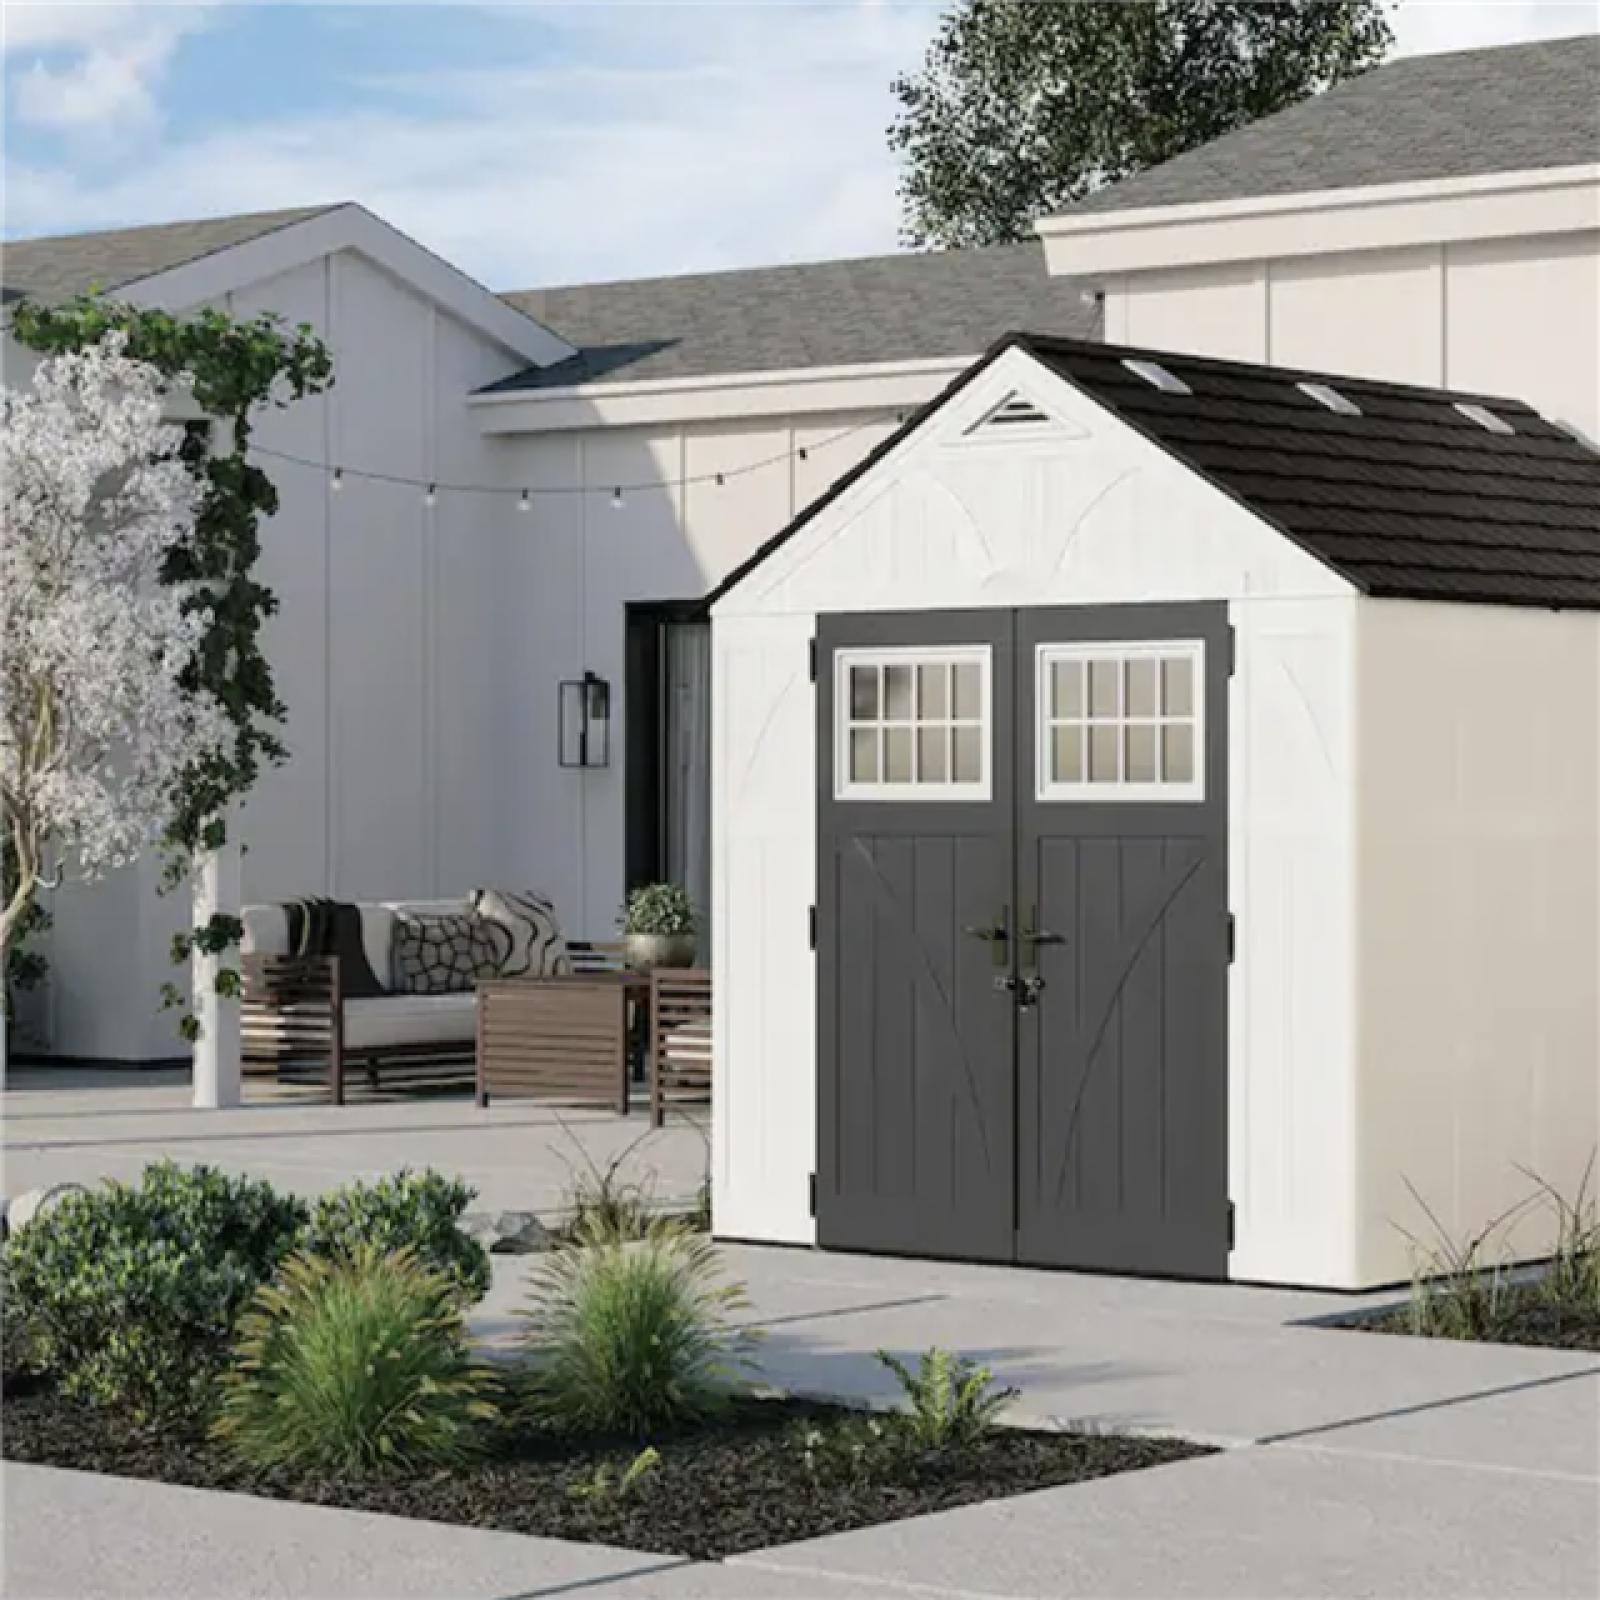 California AS-IS Suncast Tremont Plastic Storage Shed (Box 1 & 2)